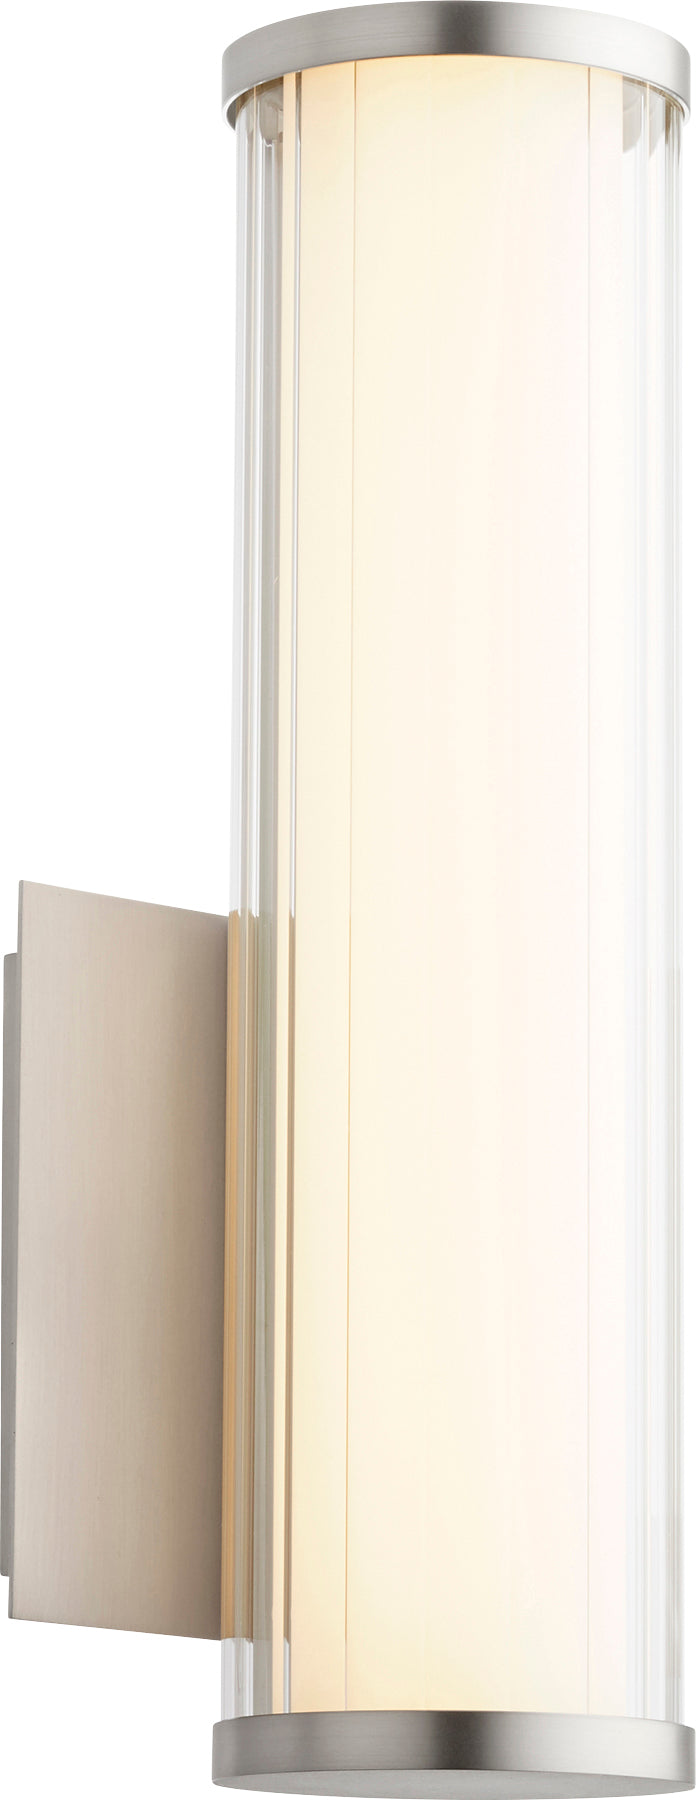 1 Light Modern and Contemporary Satin Nickel LED Glass Wall Sconce